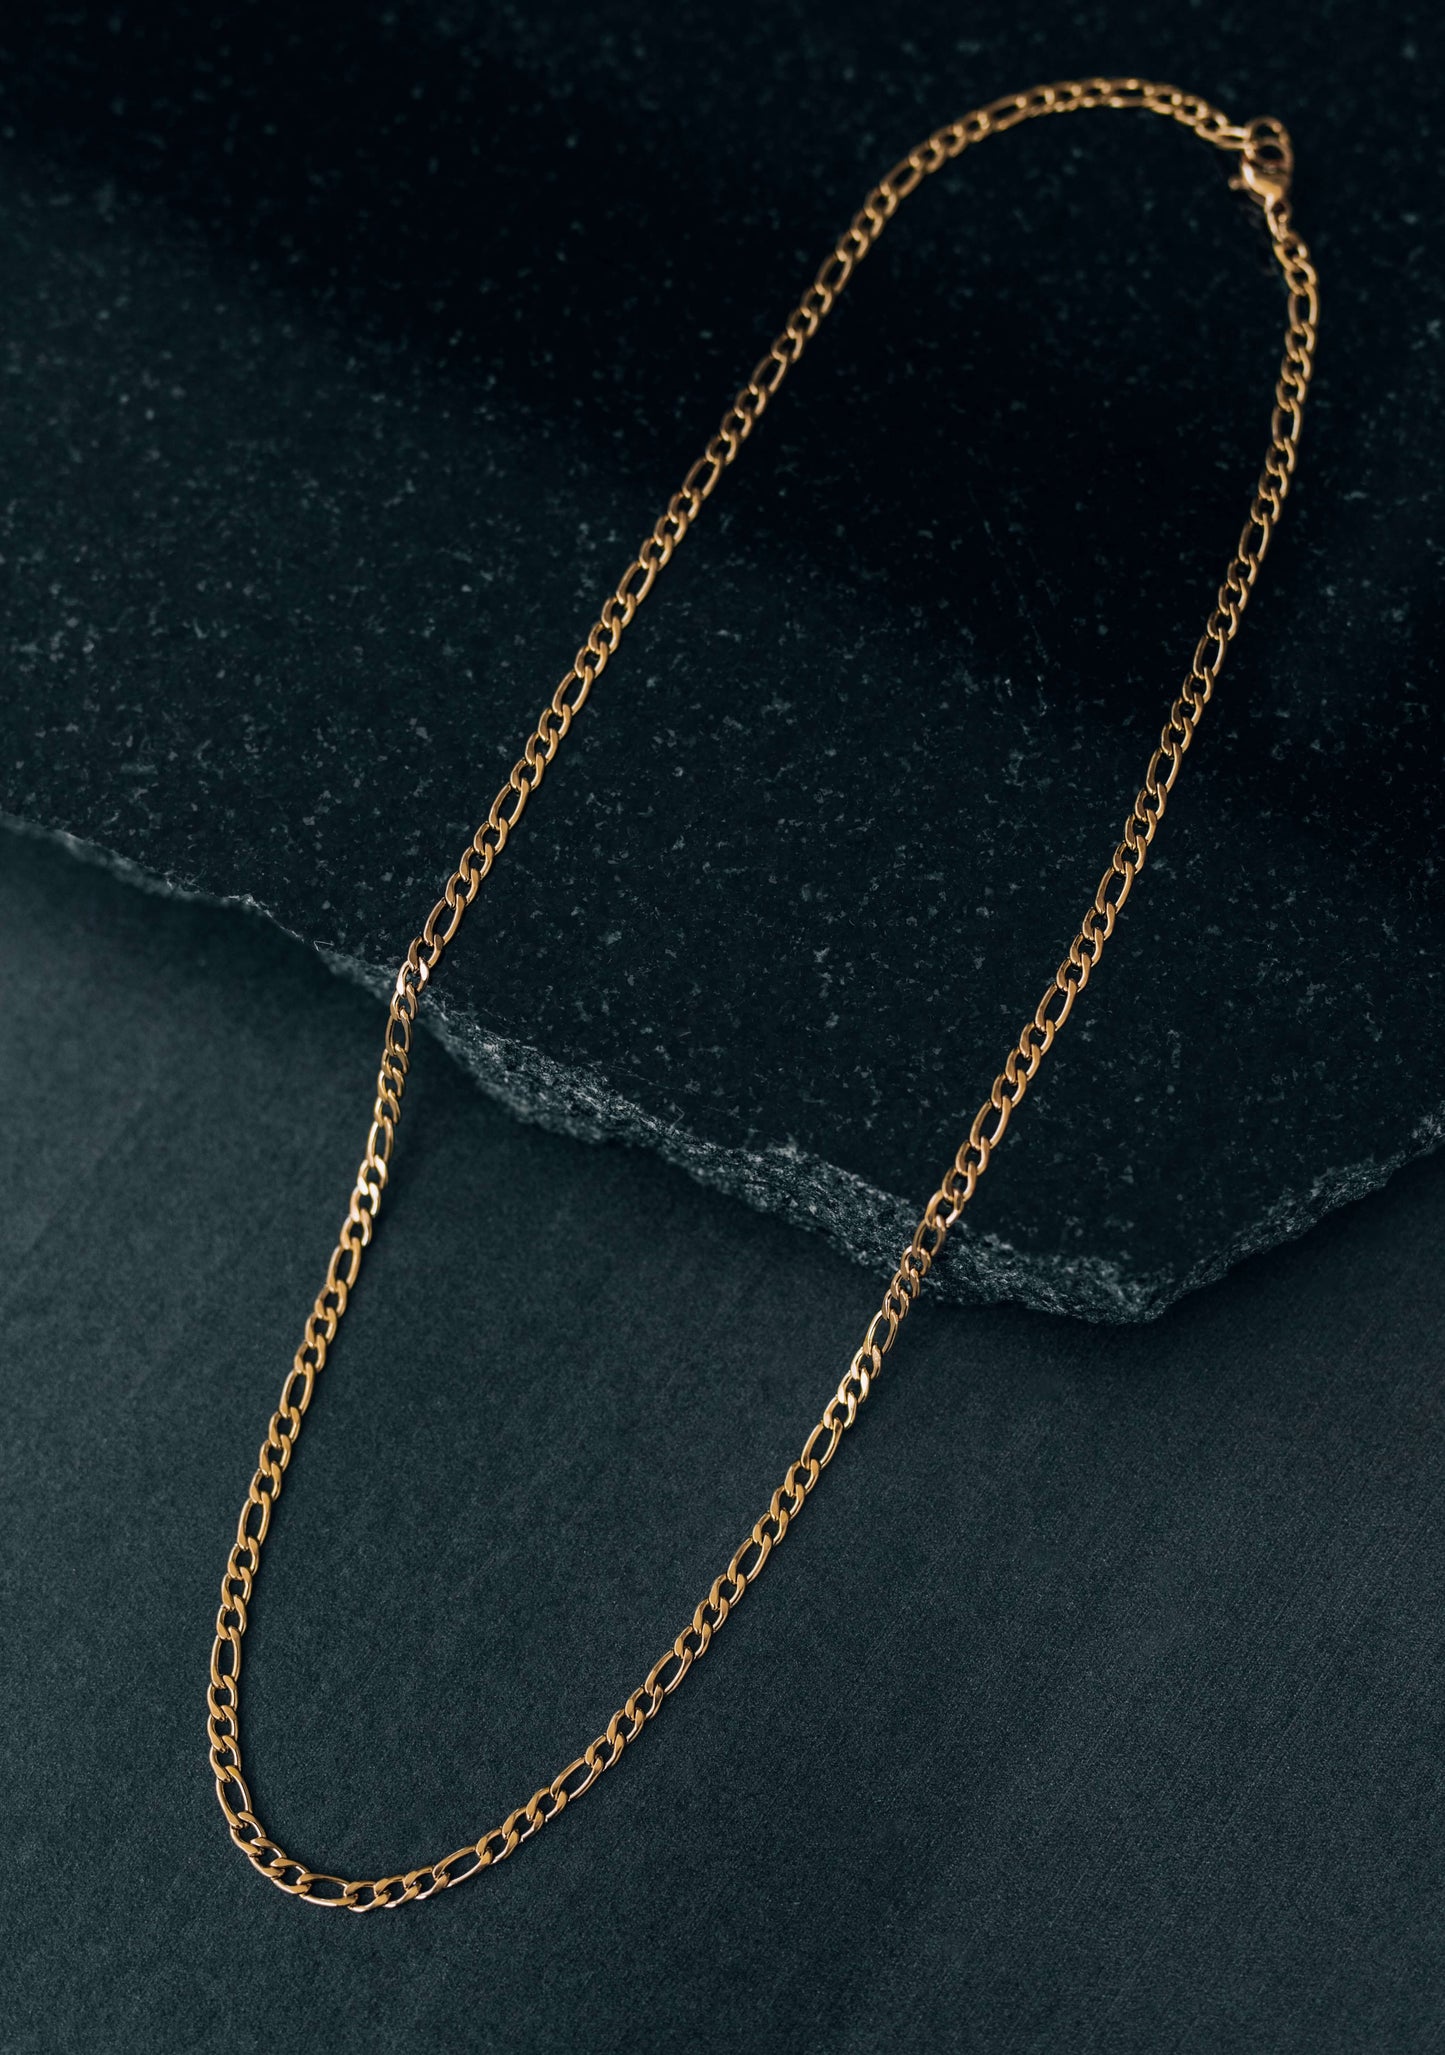 Gold 3mm Figaro Chain Necklace For Women or Men